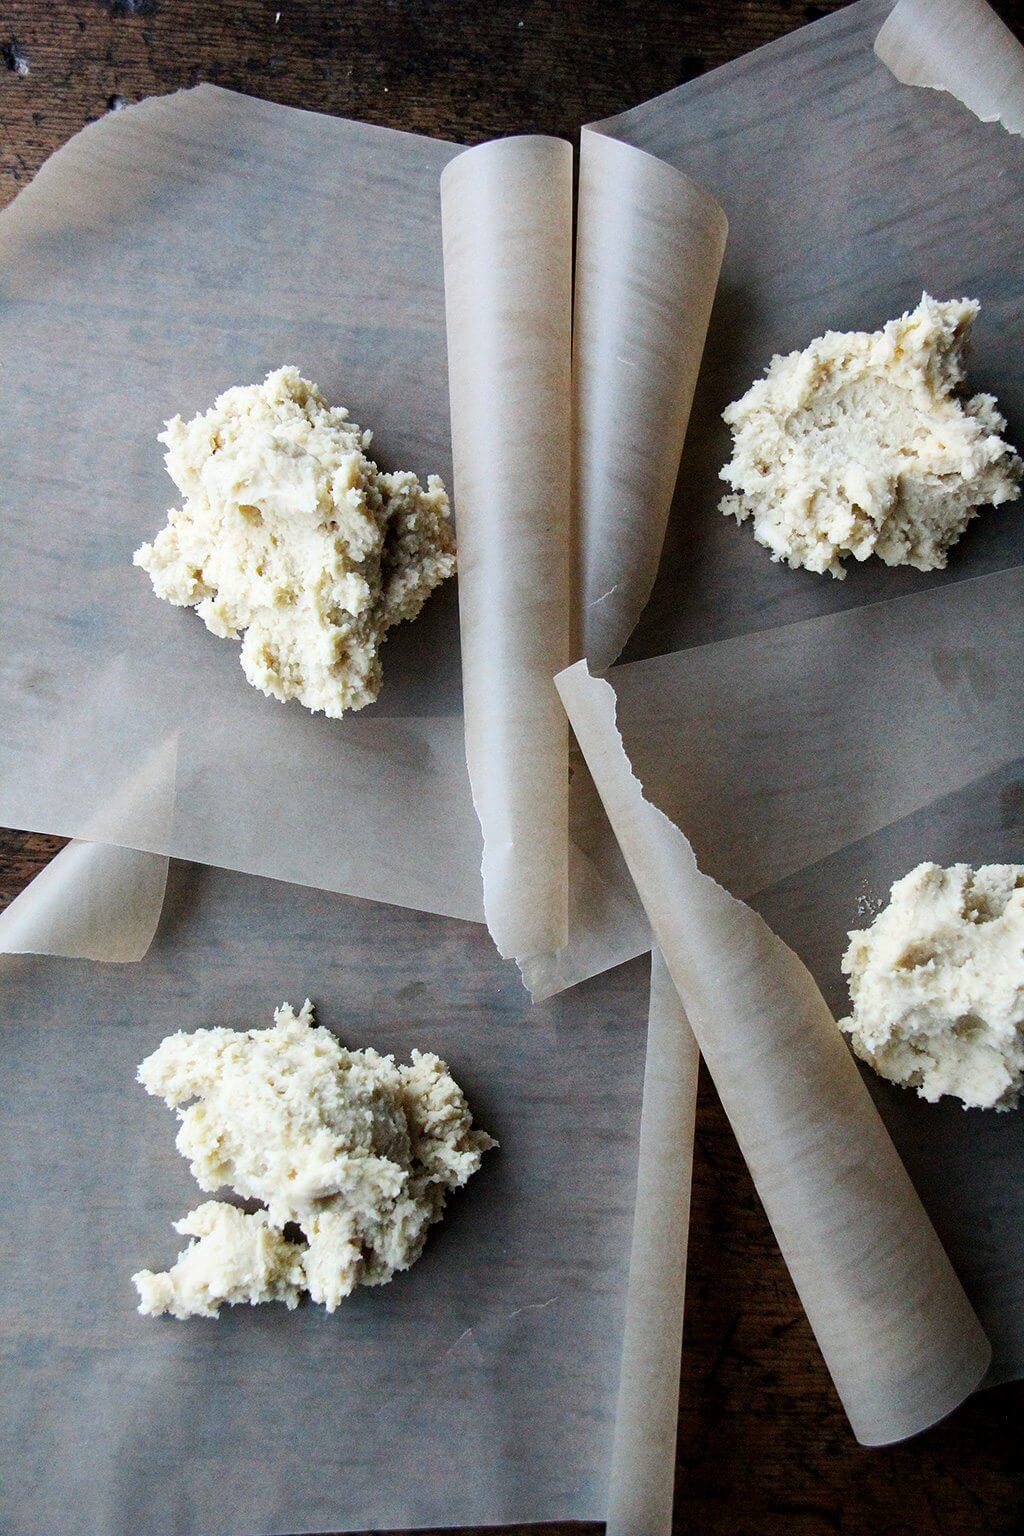 Classic cream cheese cookie dough divided into four portions.